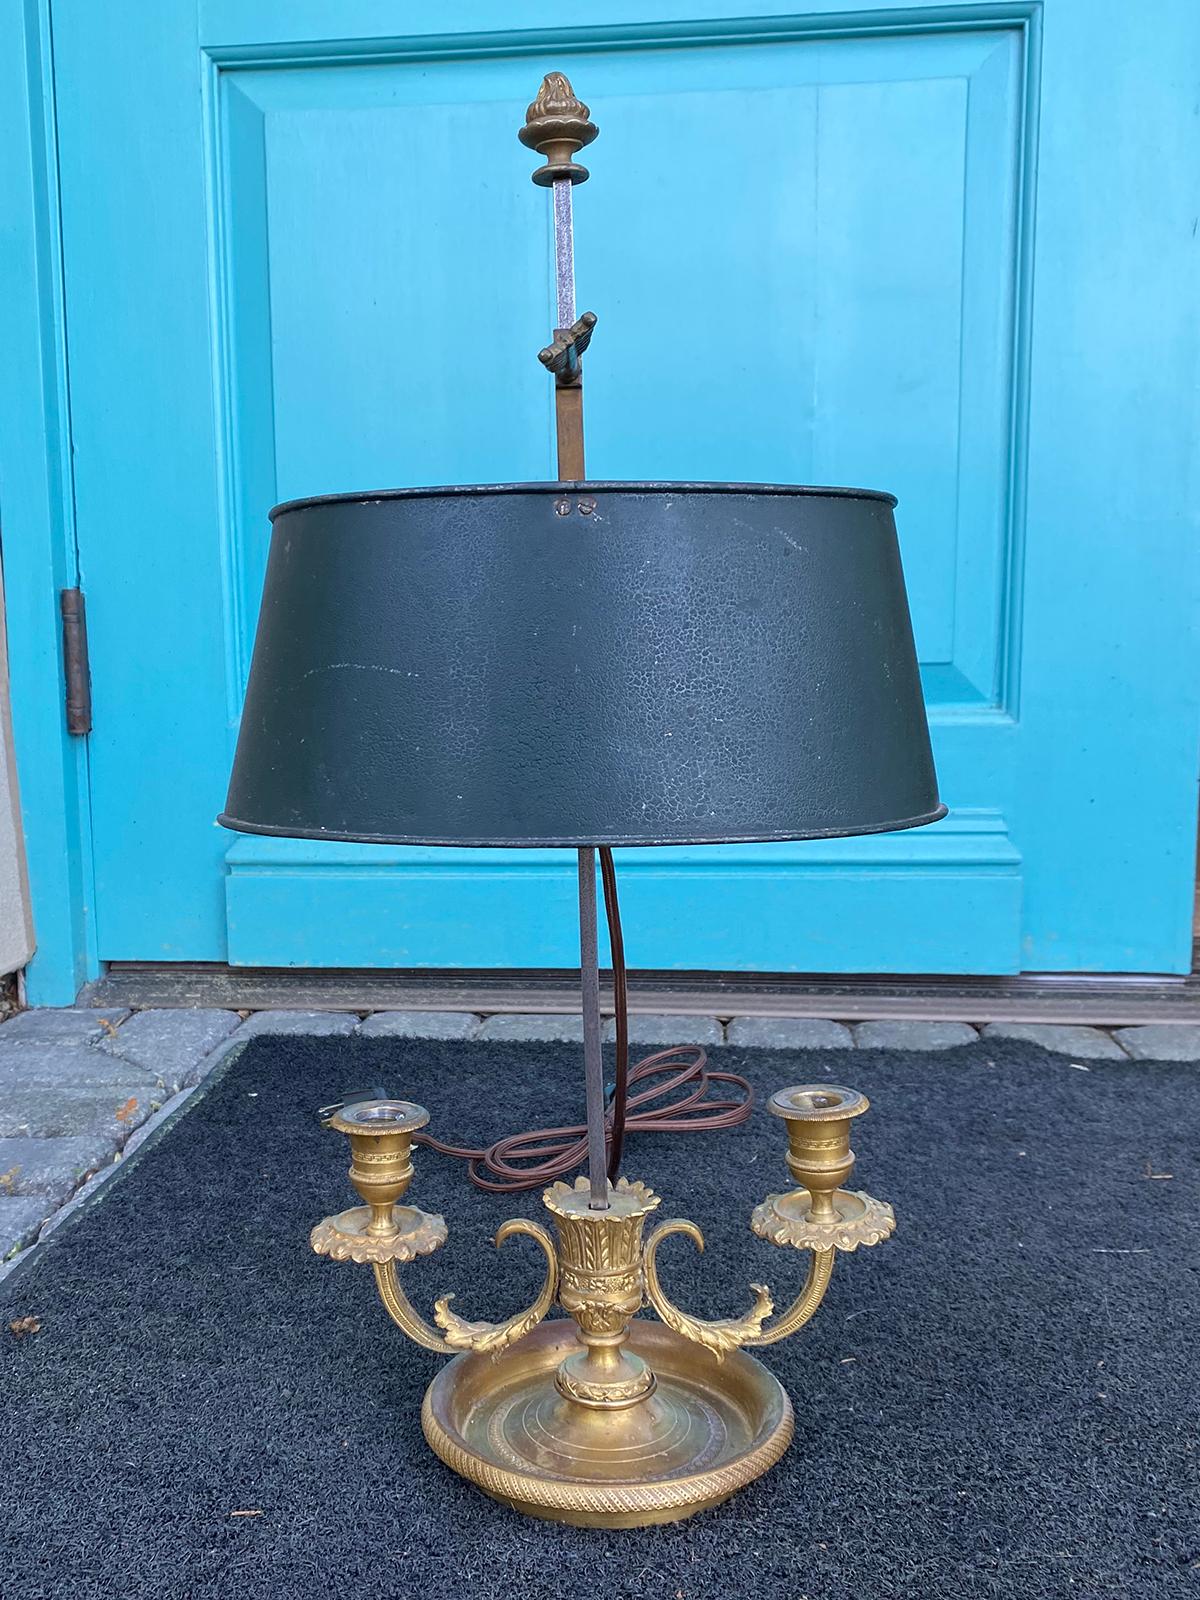 19th-20th Century French gilt bronze two light bouillotte lamp, green painted tole shade
New wiring.